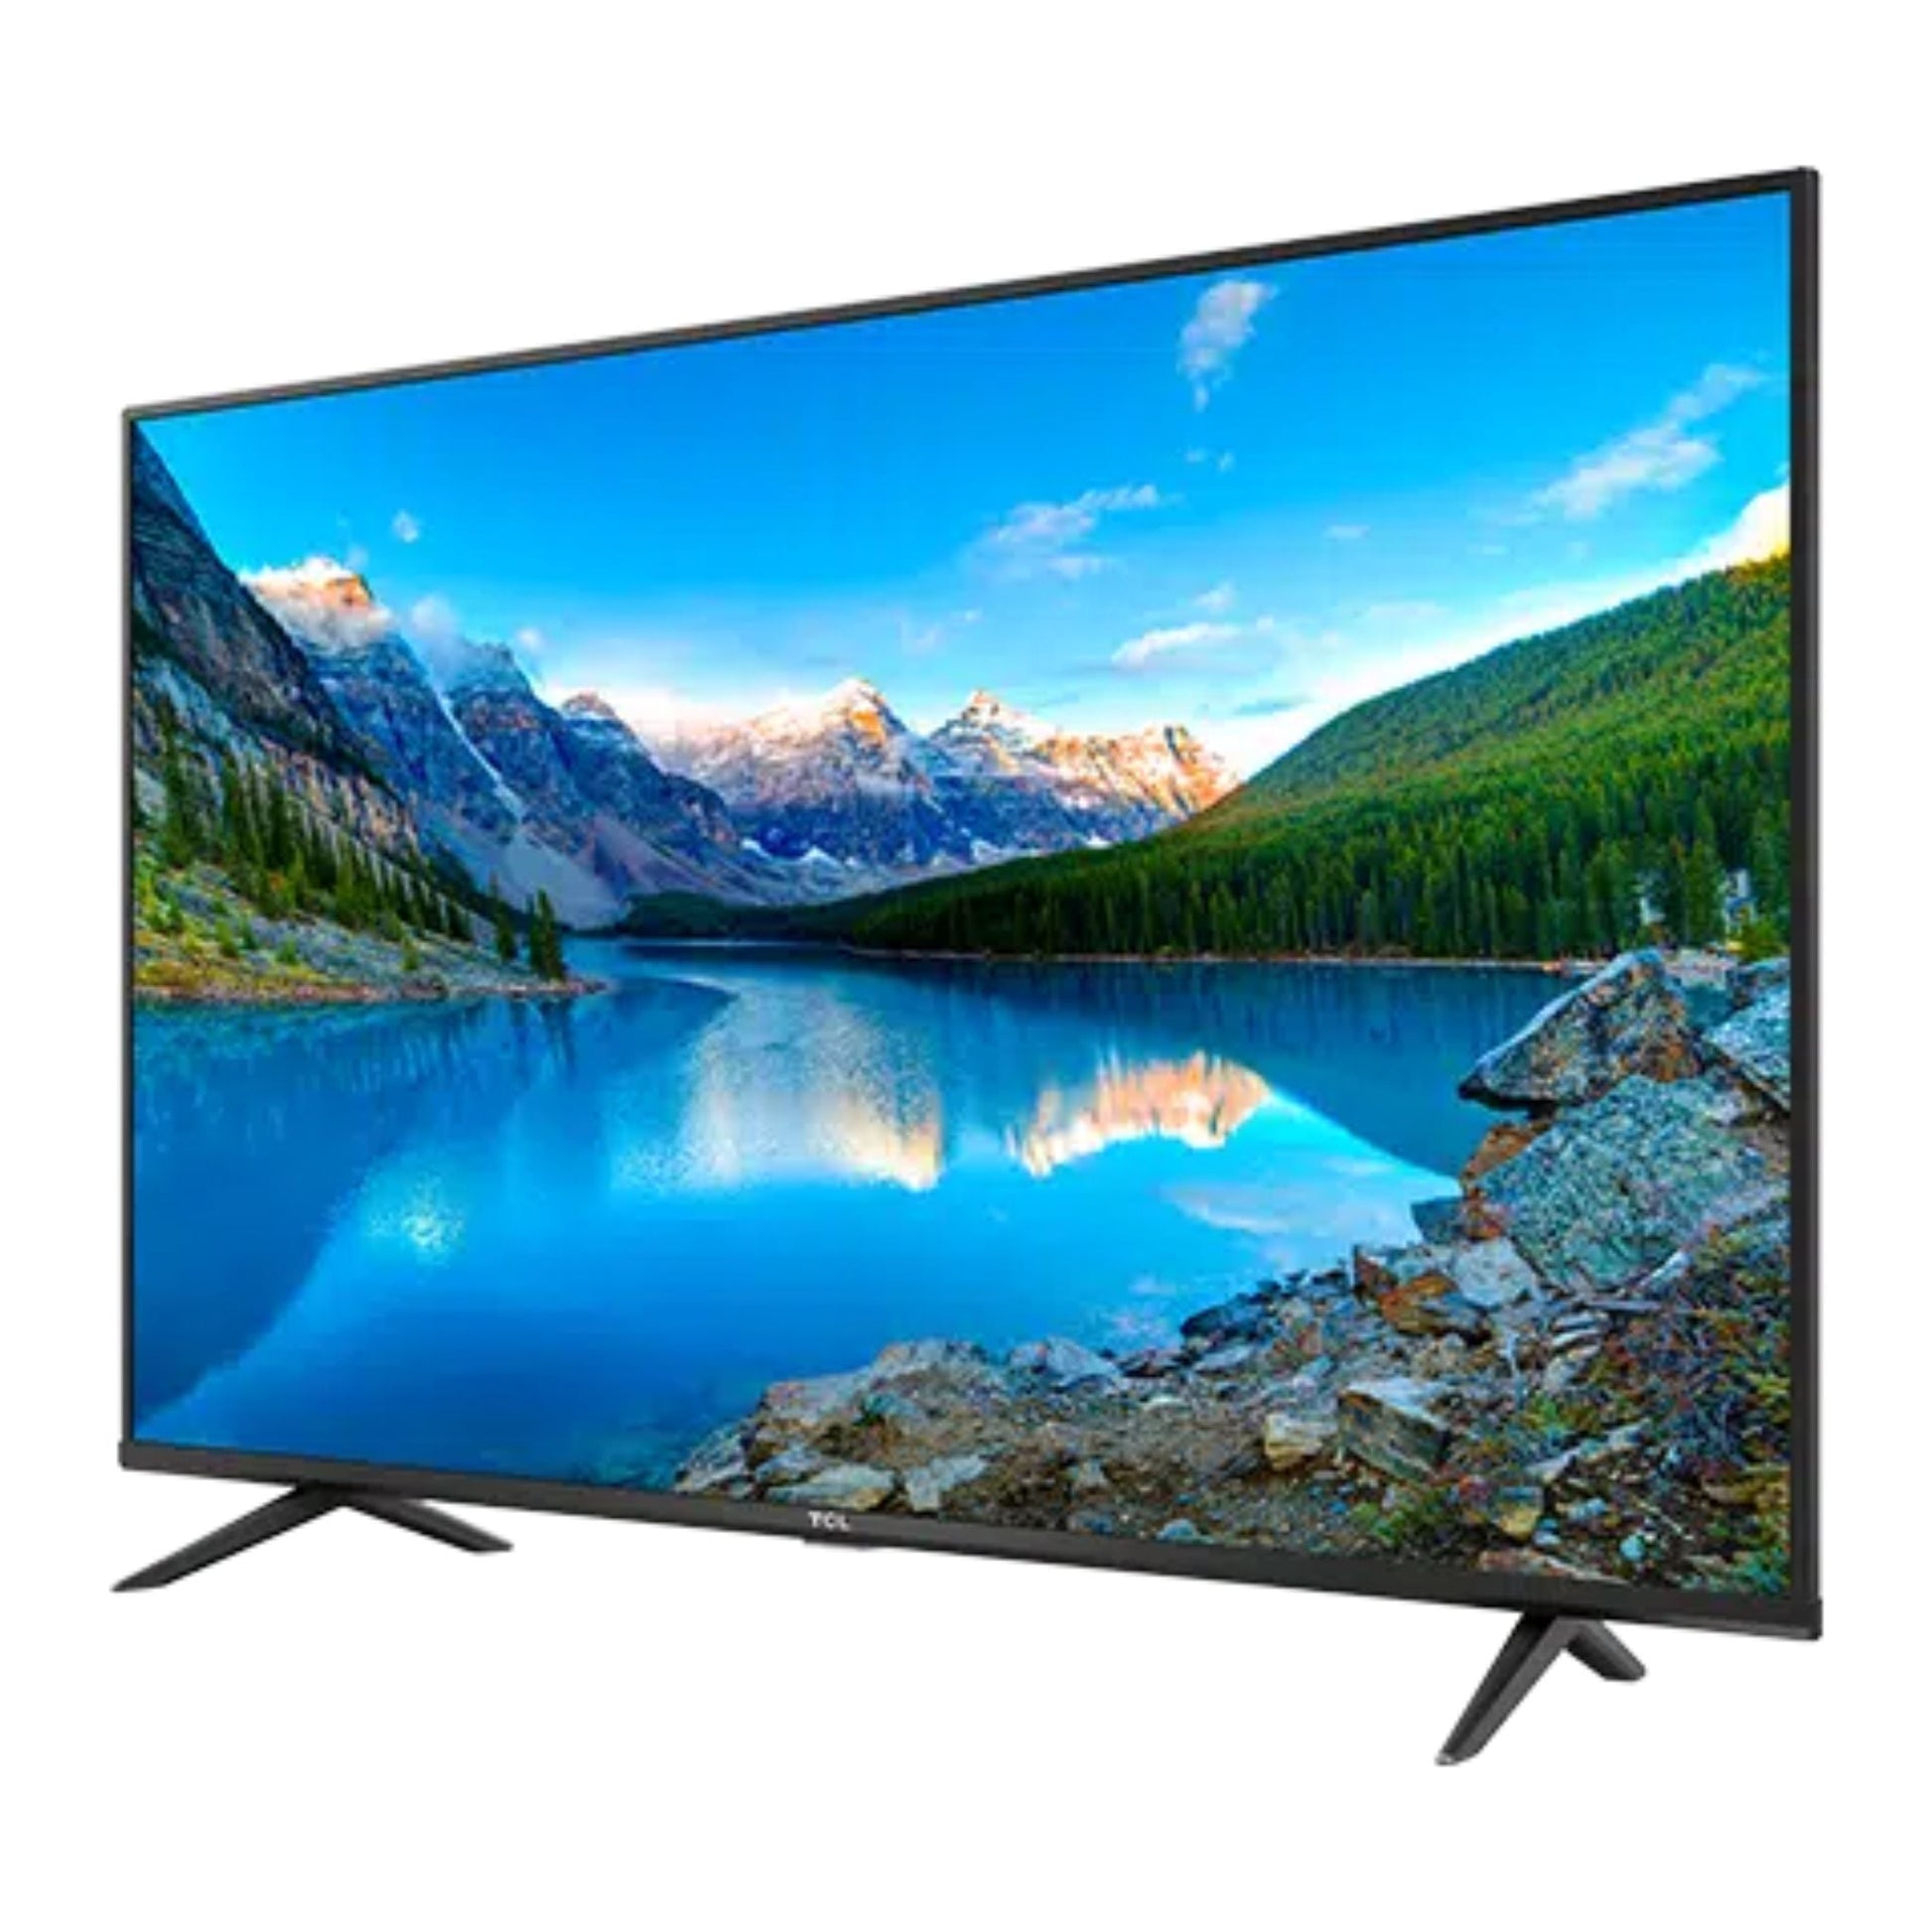 TCL 58 inch Smart TV, 58P635